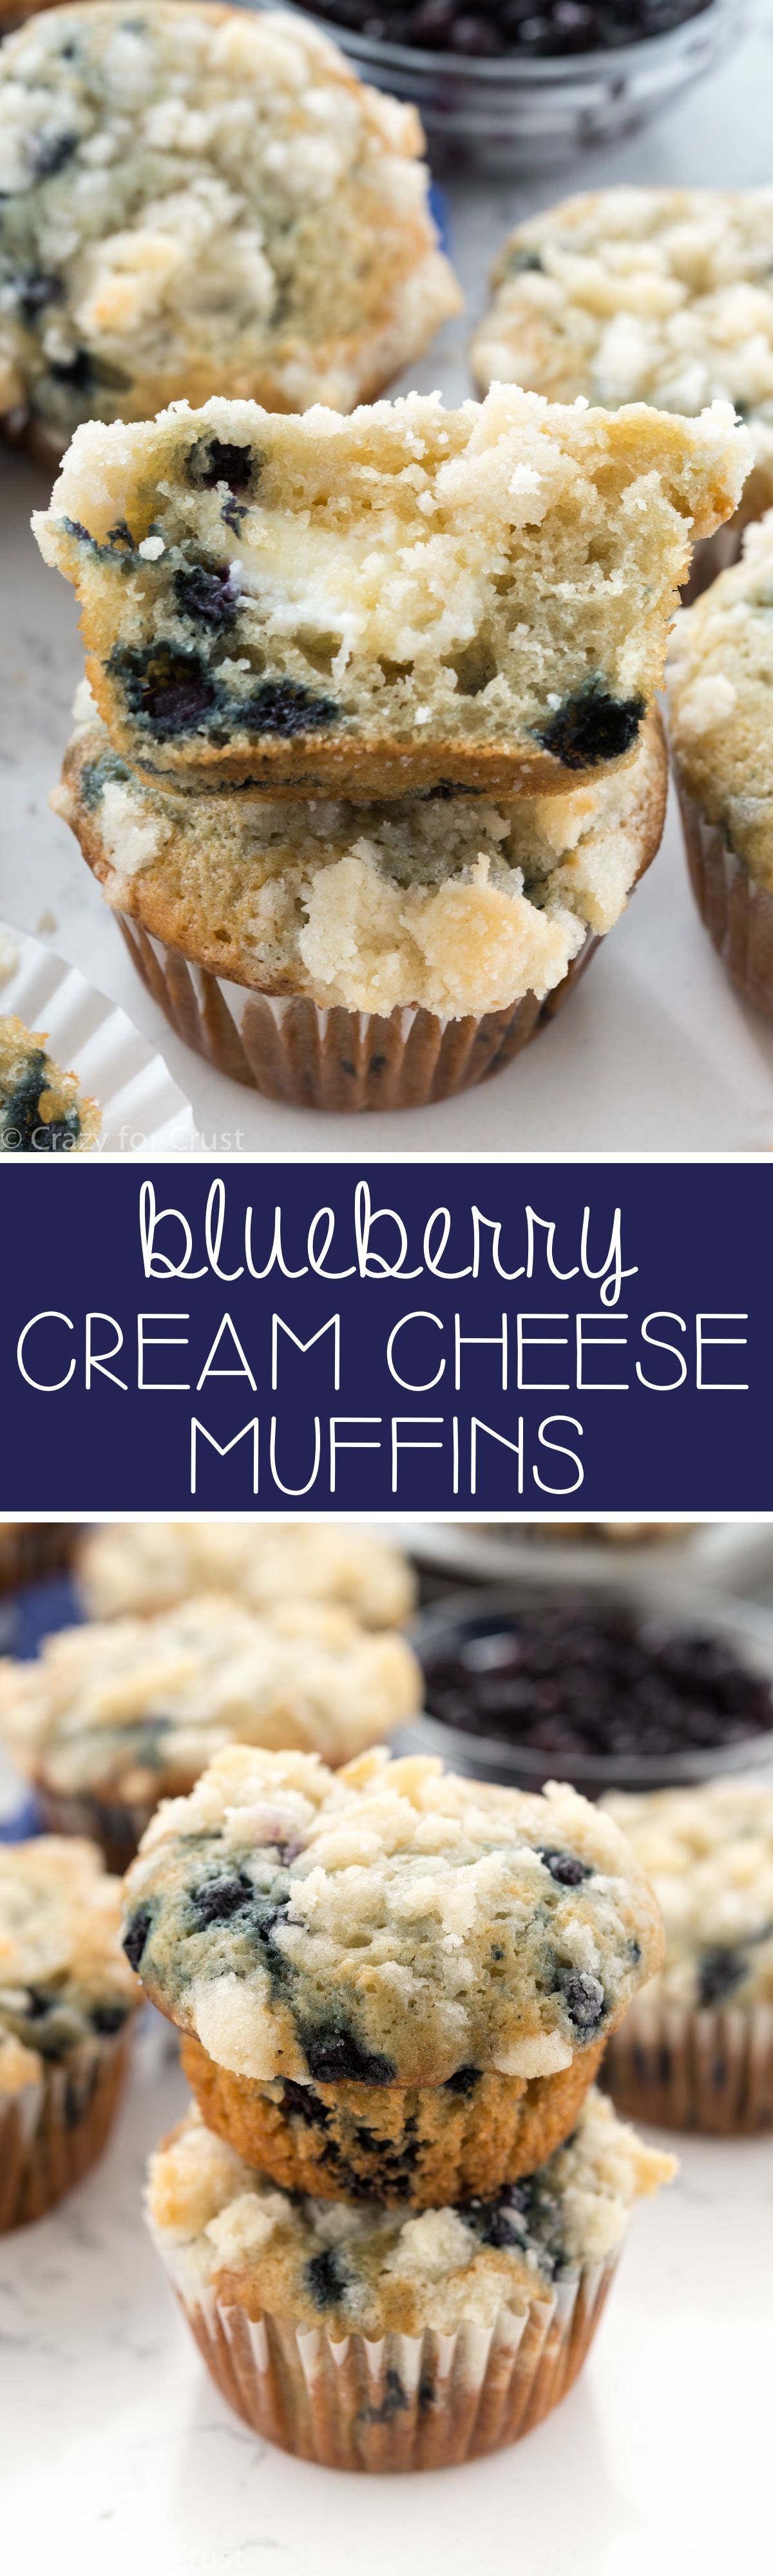 Blueberry Cream Cheese Muffins – this is the PERFECT blueberry muffin recipe. Easy, soft and fluffy, and full of juicy blueberries